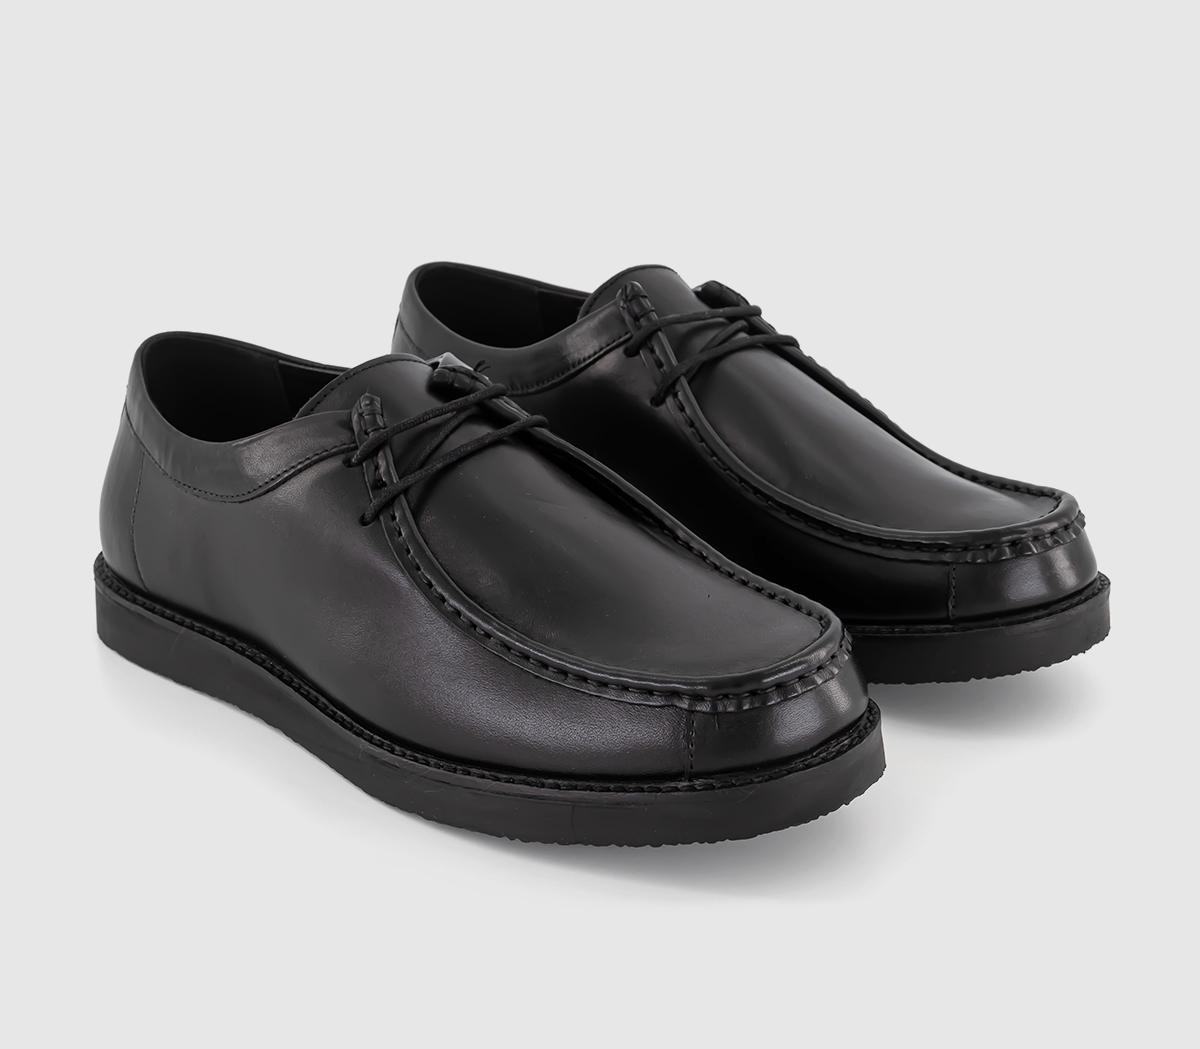 OFFICE Chelmsford Stitch Apron Shoes Black Leather, 6